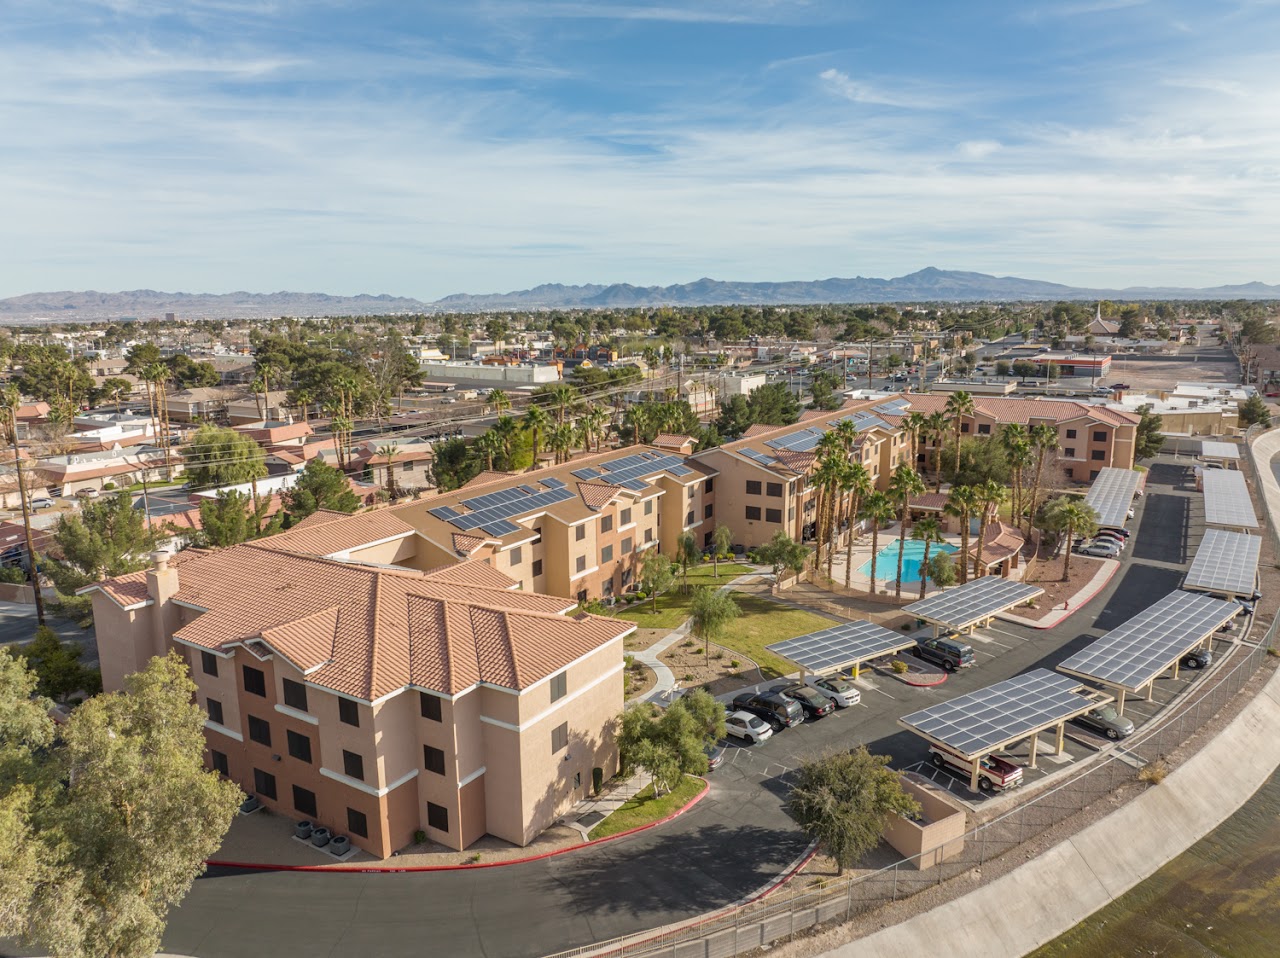 Photo of SIERRA PINES. Affordable housing located at 3201 S. MOJAVE LAS VEGAS, NV 89121